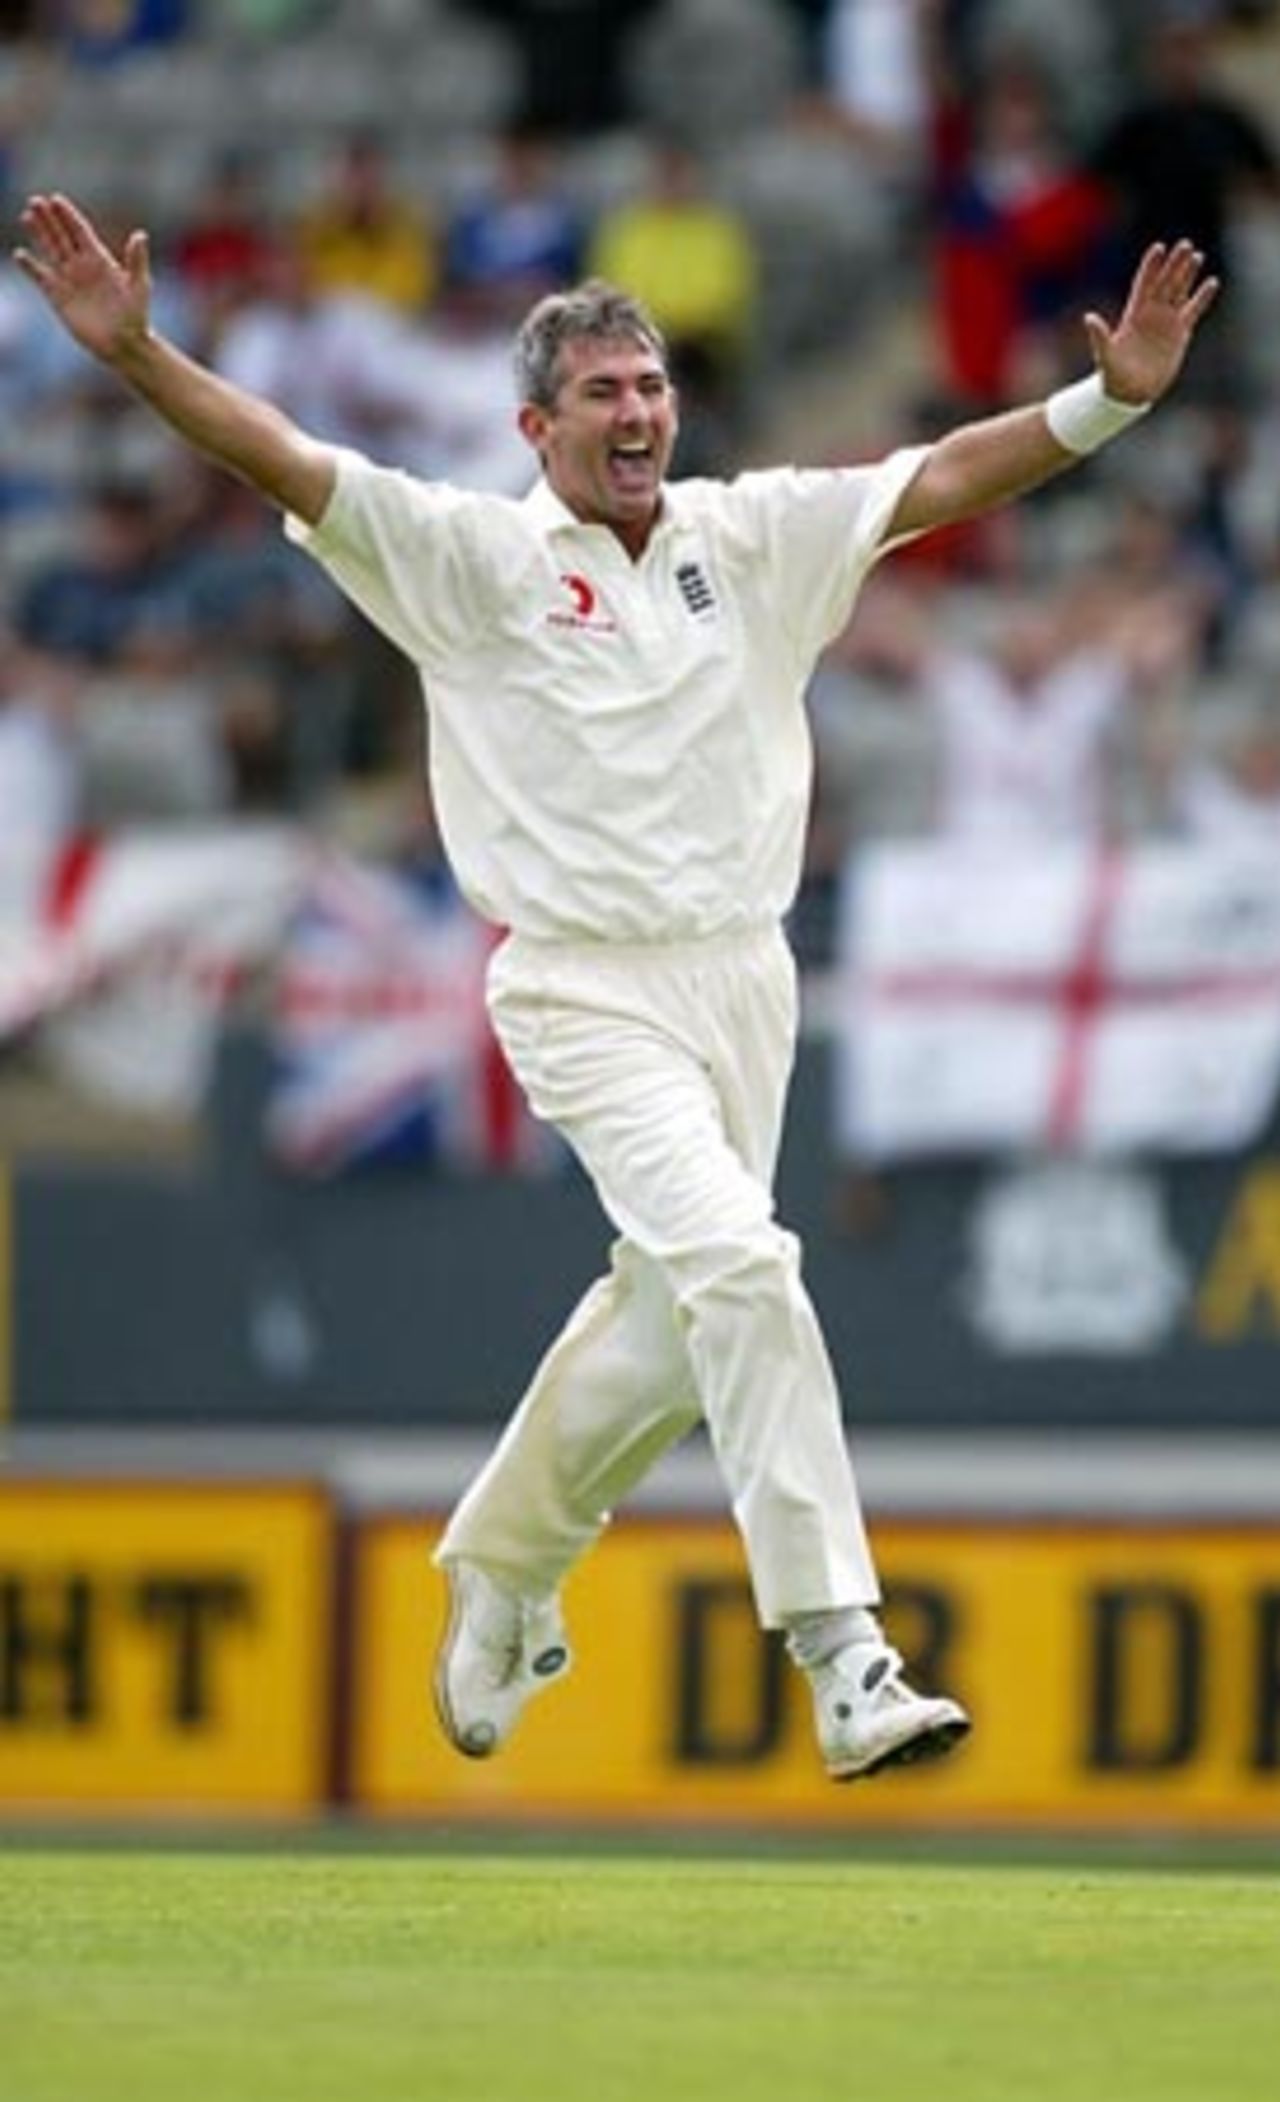 England bowler Andy Caddick celebrates the dismissal of New Zealand batsman Lou Vincent, bowled for 10. Caddick ended his first day spell with 4-57 from 20 overs. 3rd Test: New Zealand v England at Eden Park, Auckland, 30 March-3 April 2002 (30 March 2002).